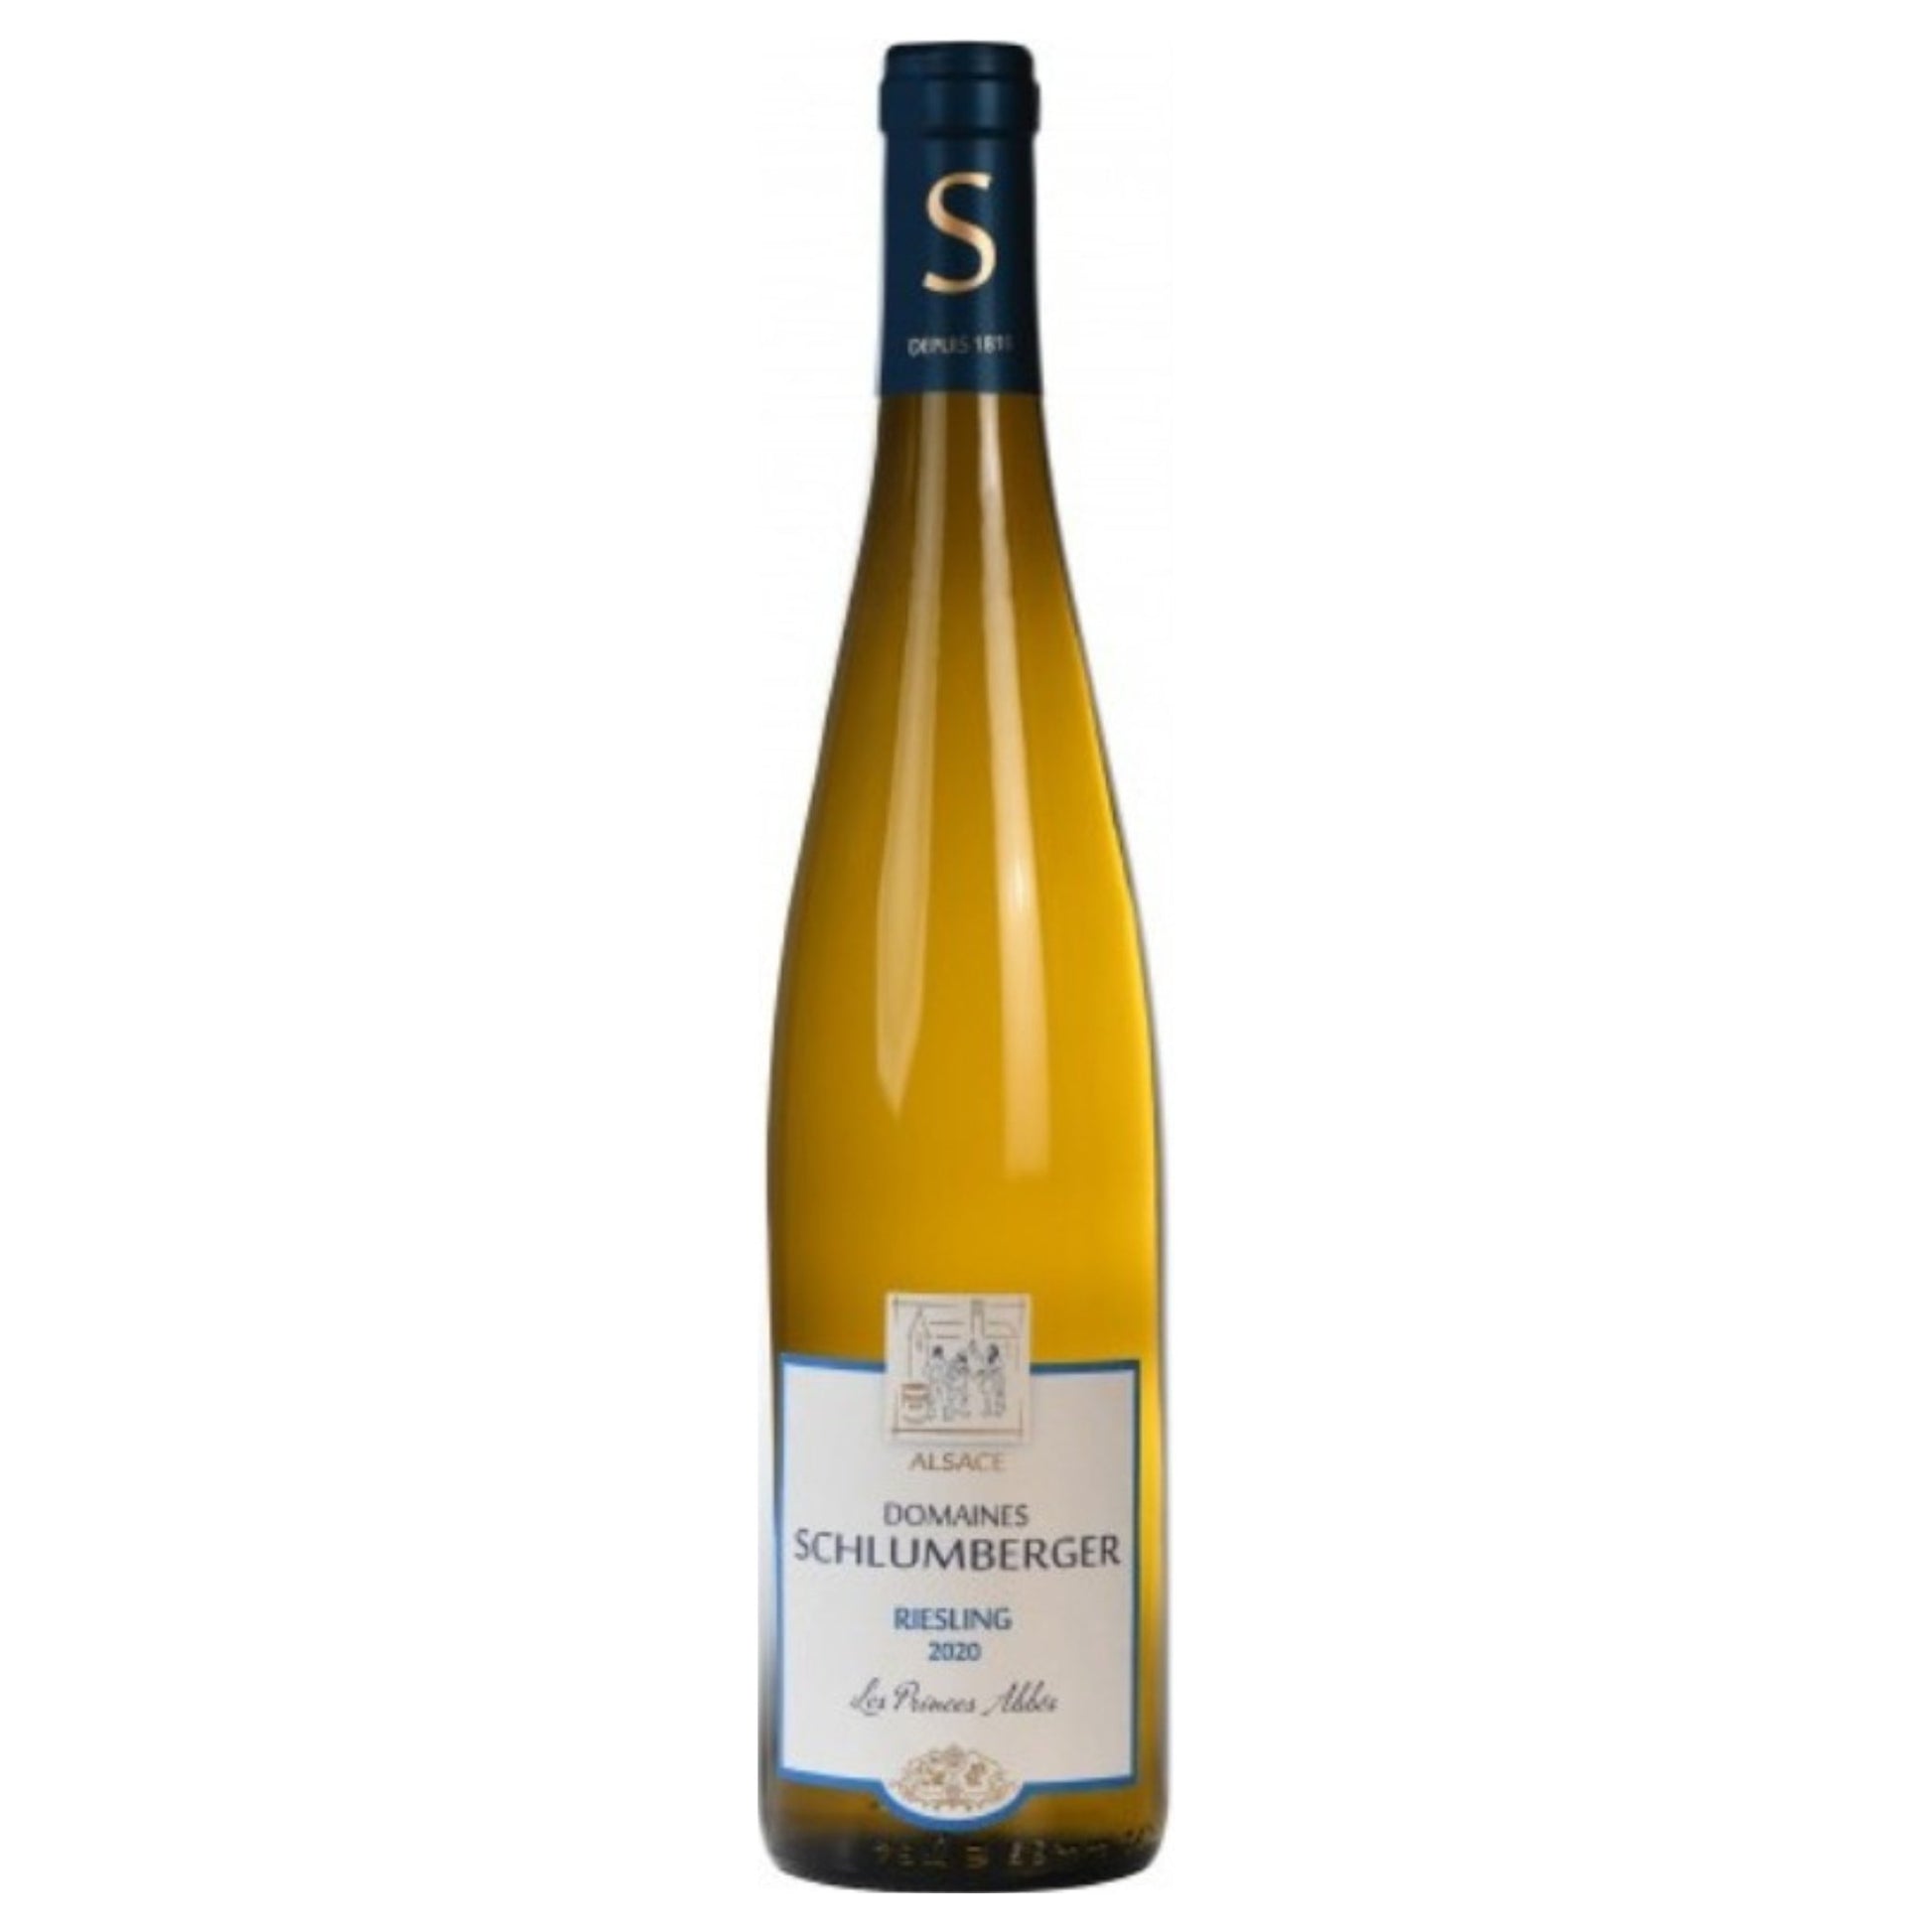 Schlumberger Riesling Les Princes Abbes - Grand Vin Pte Ltd